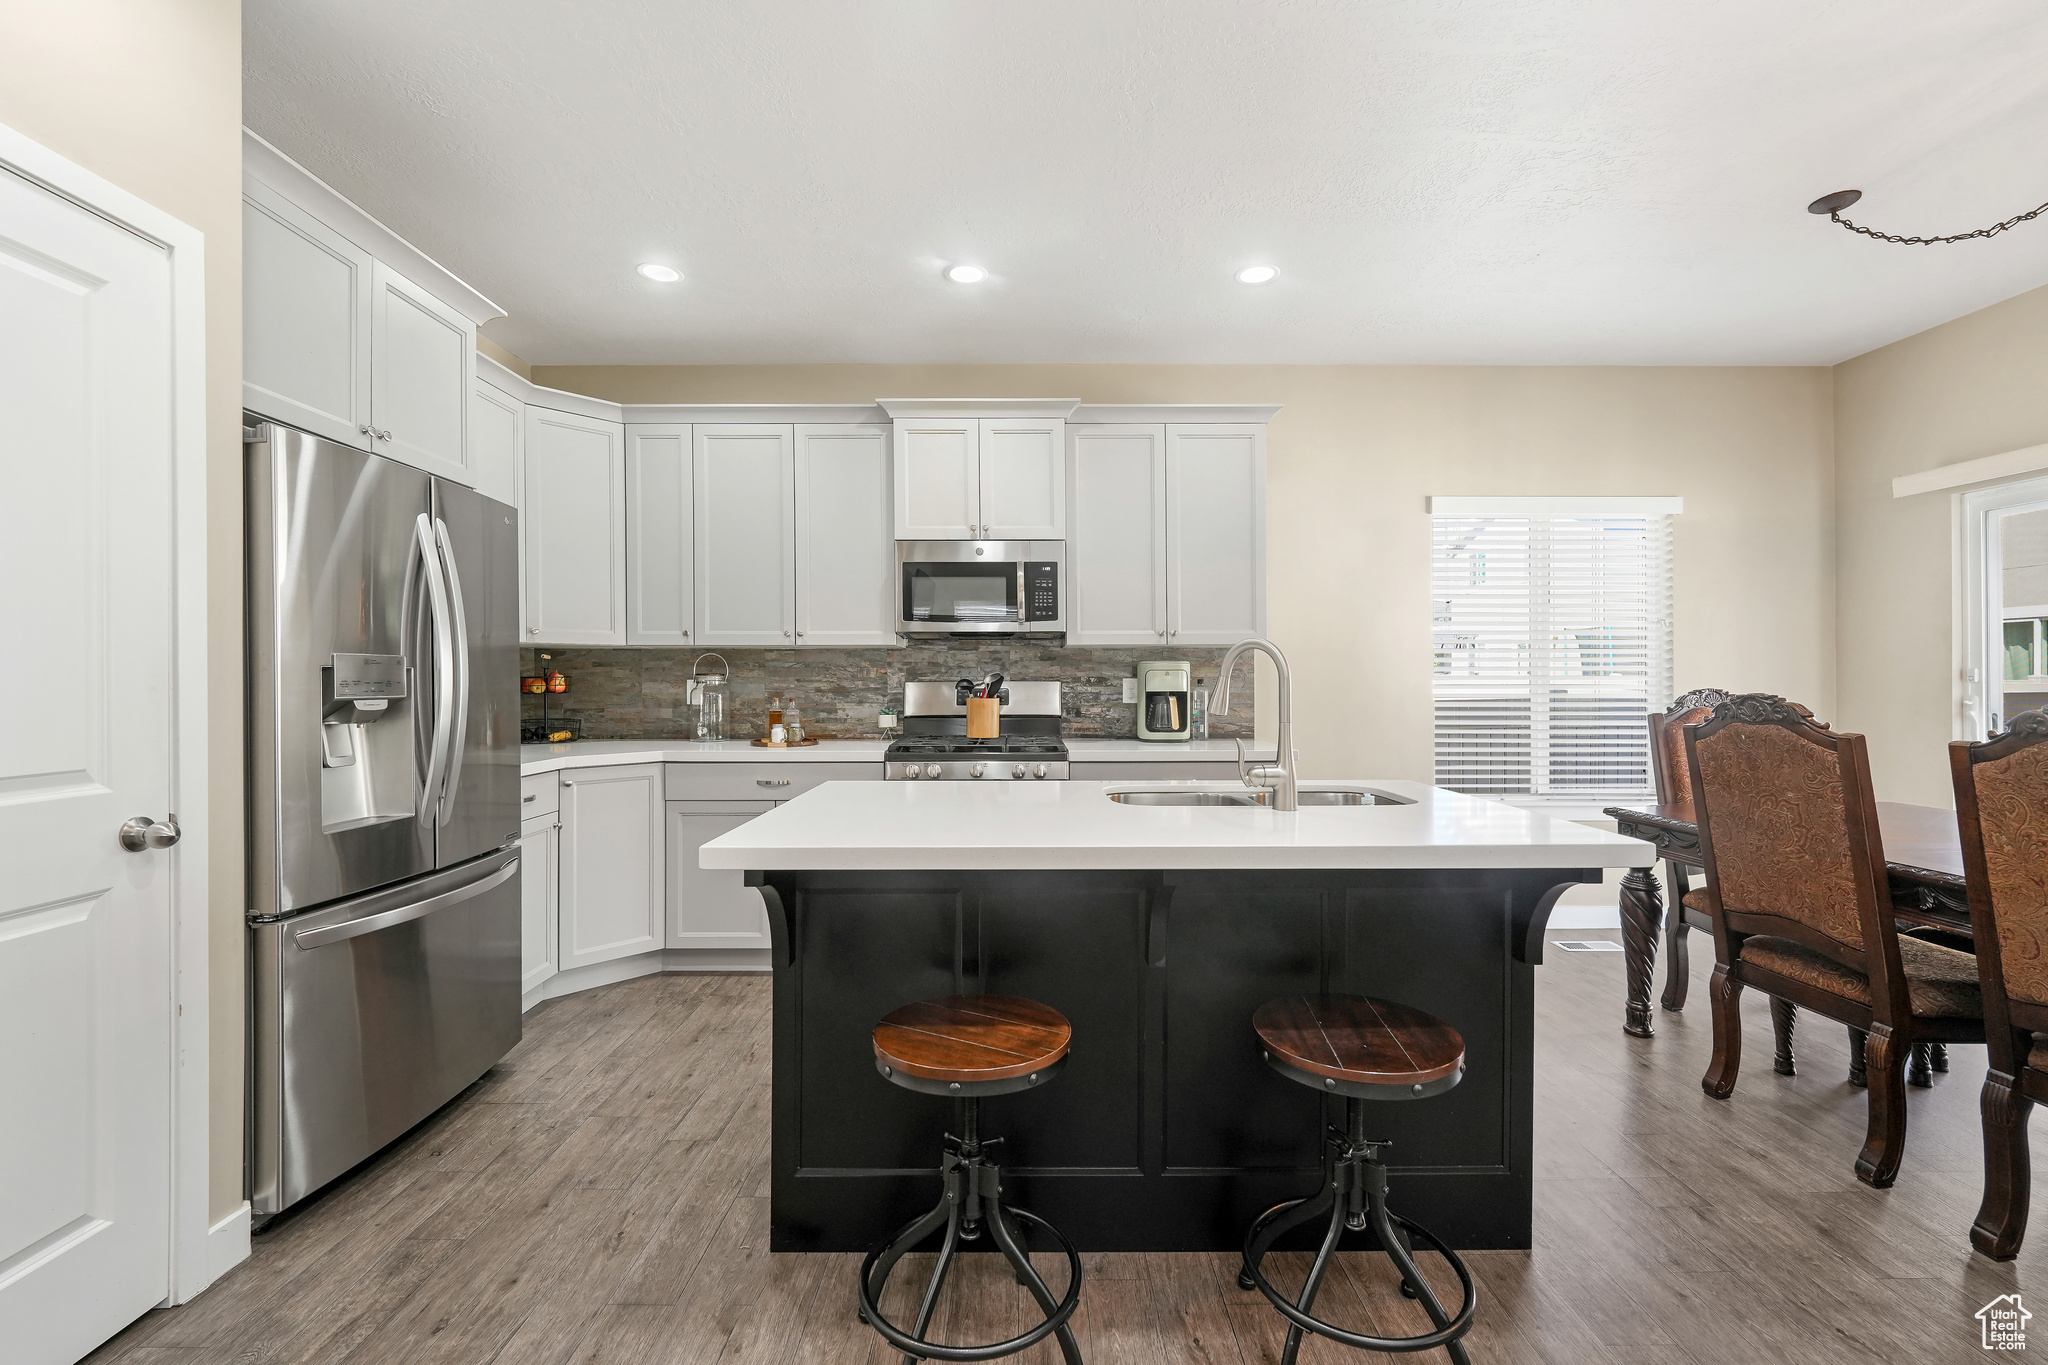 Kitchen featuring wood-type flooring, sink, stainless steel appliances, and white cabinetry